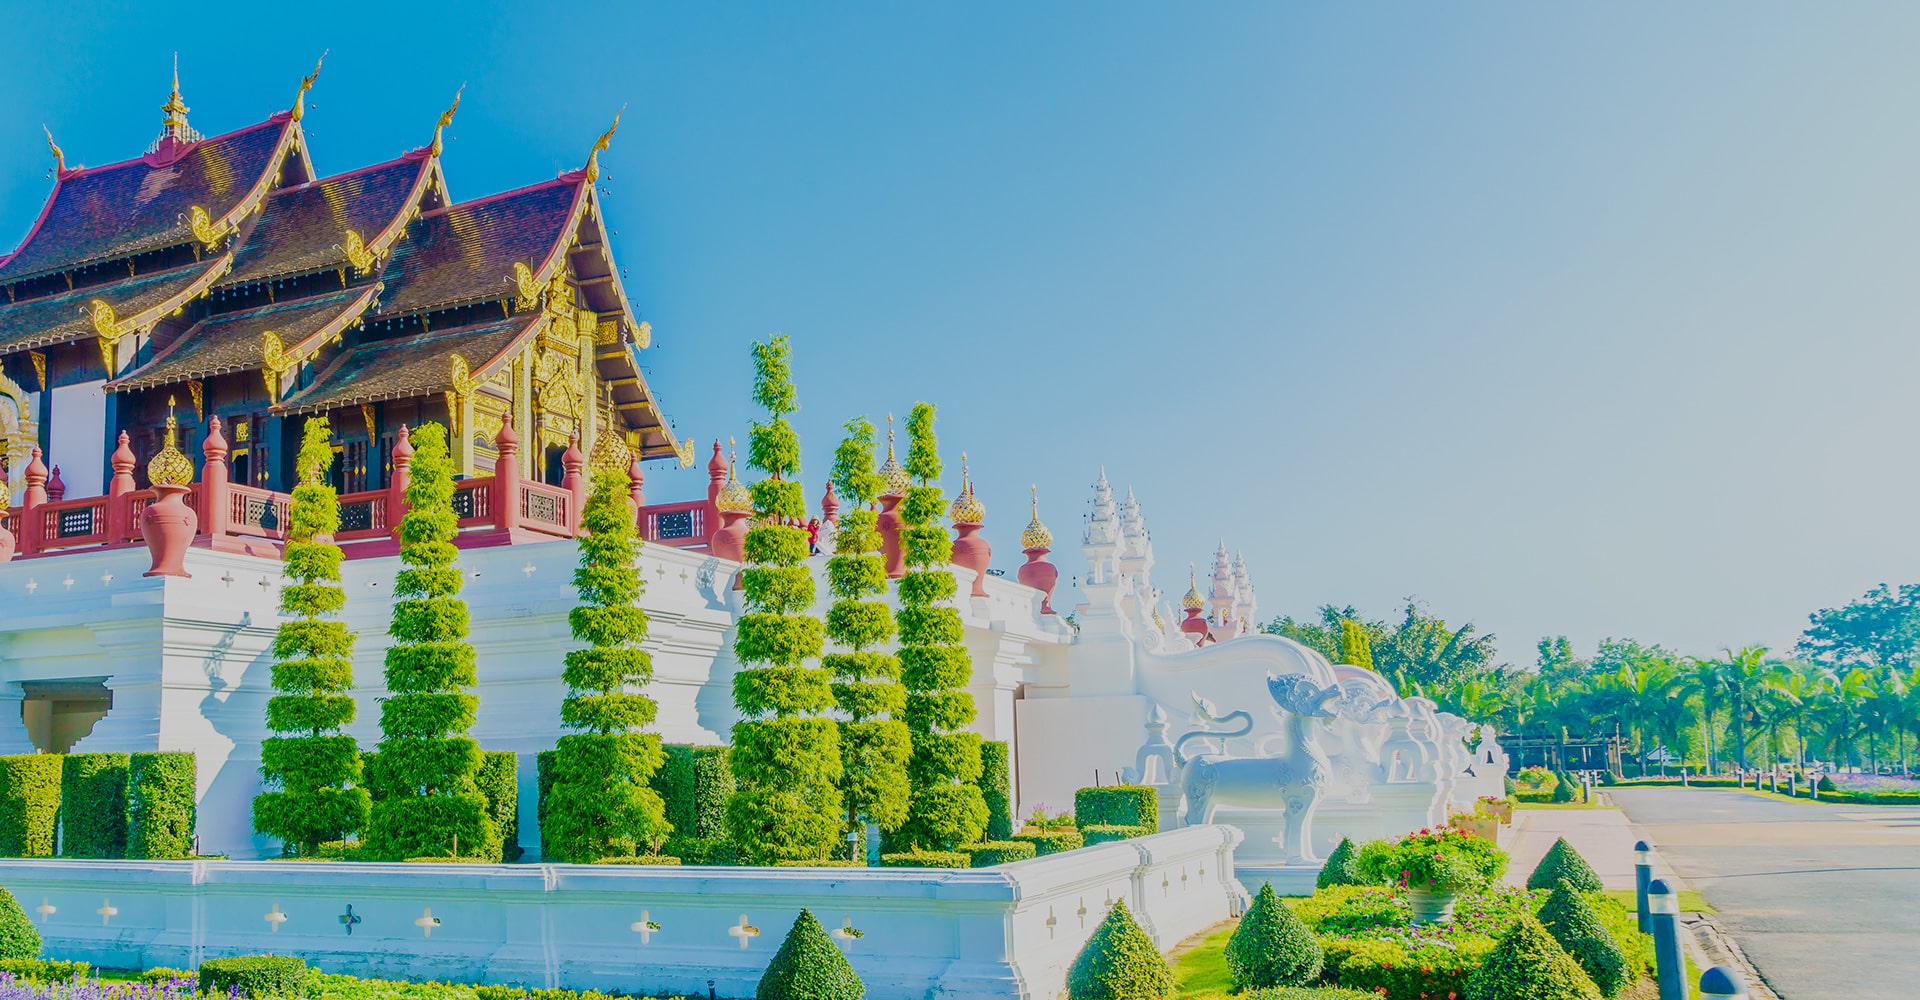 A Captivating Landscape Photo of a Thai Temple, Adorned with Lush Plants and Statues, with the Gold Gleaming Under the Sun.